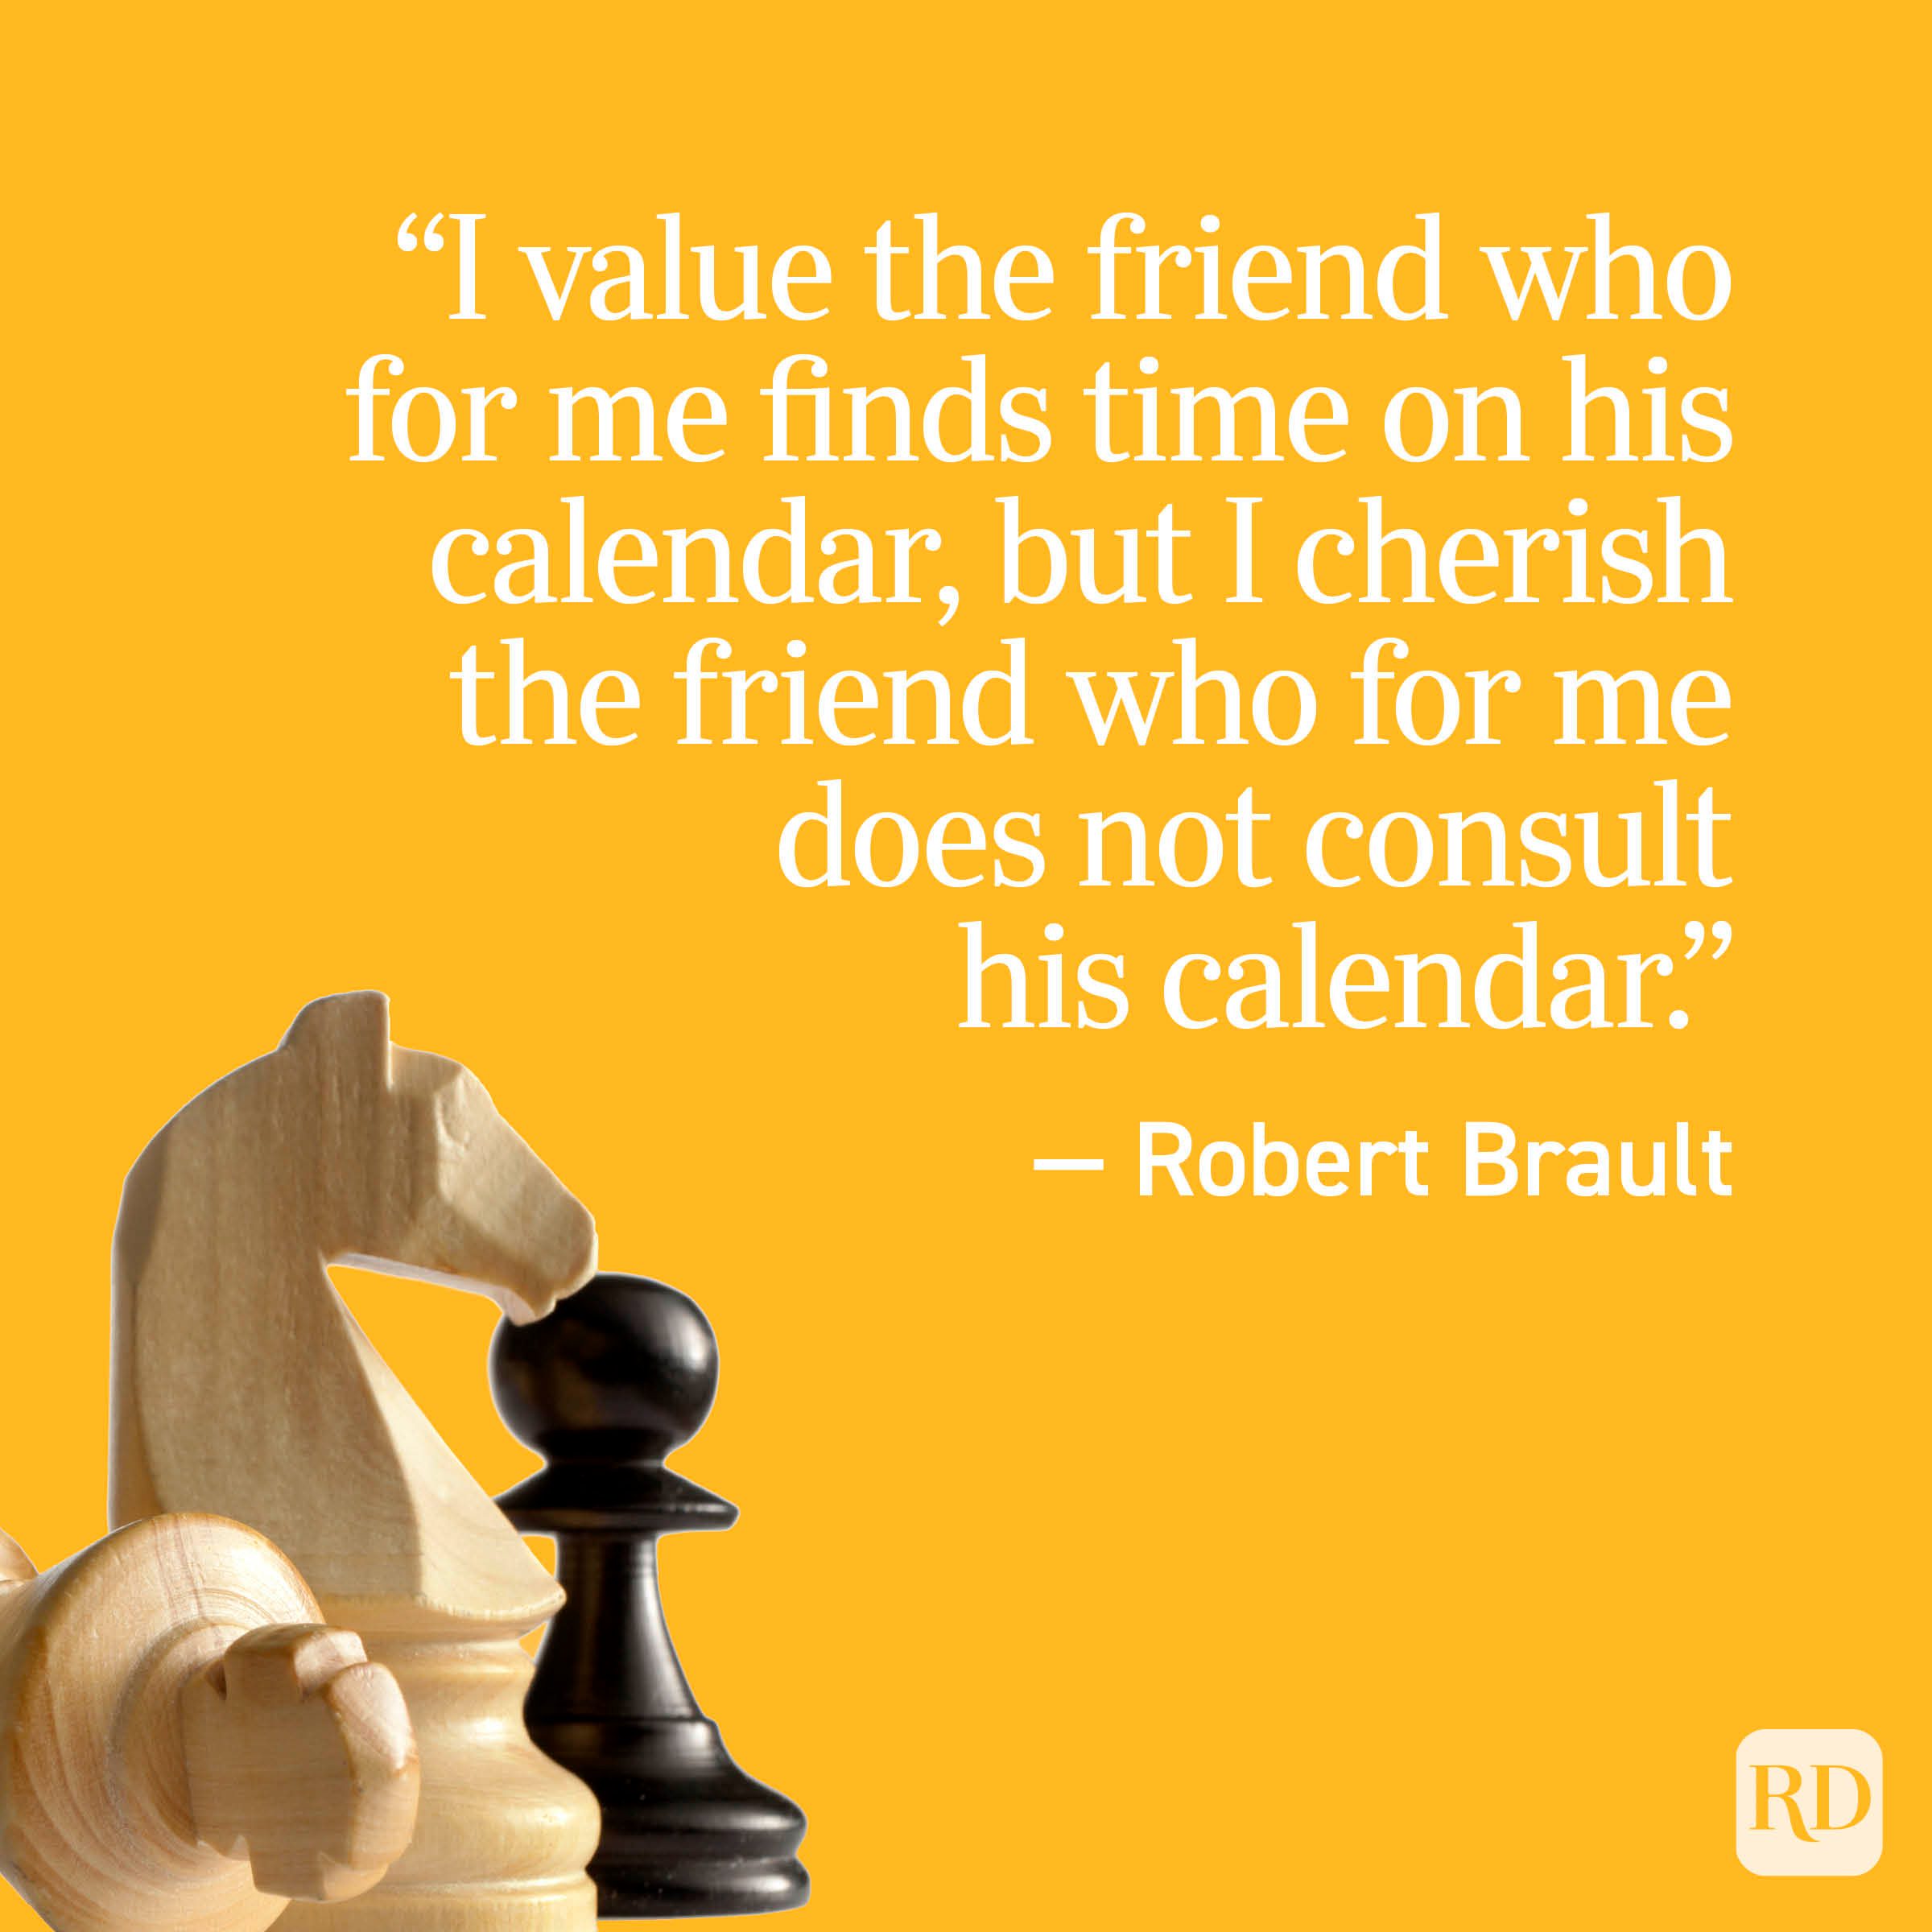 "I value the friend who for me finds time on his calendar, but I cherish the friend who for me does not consult his calendar." - Robert Brault